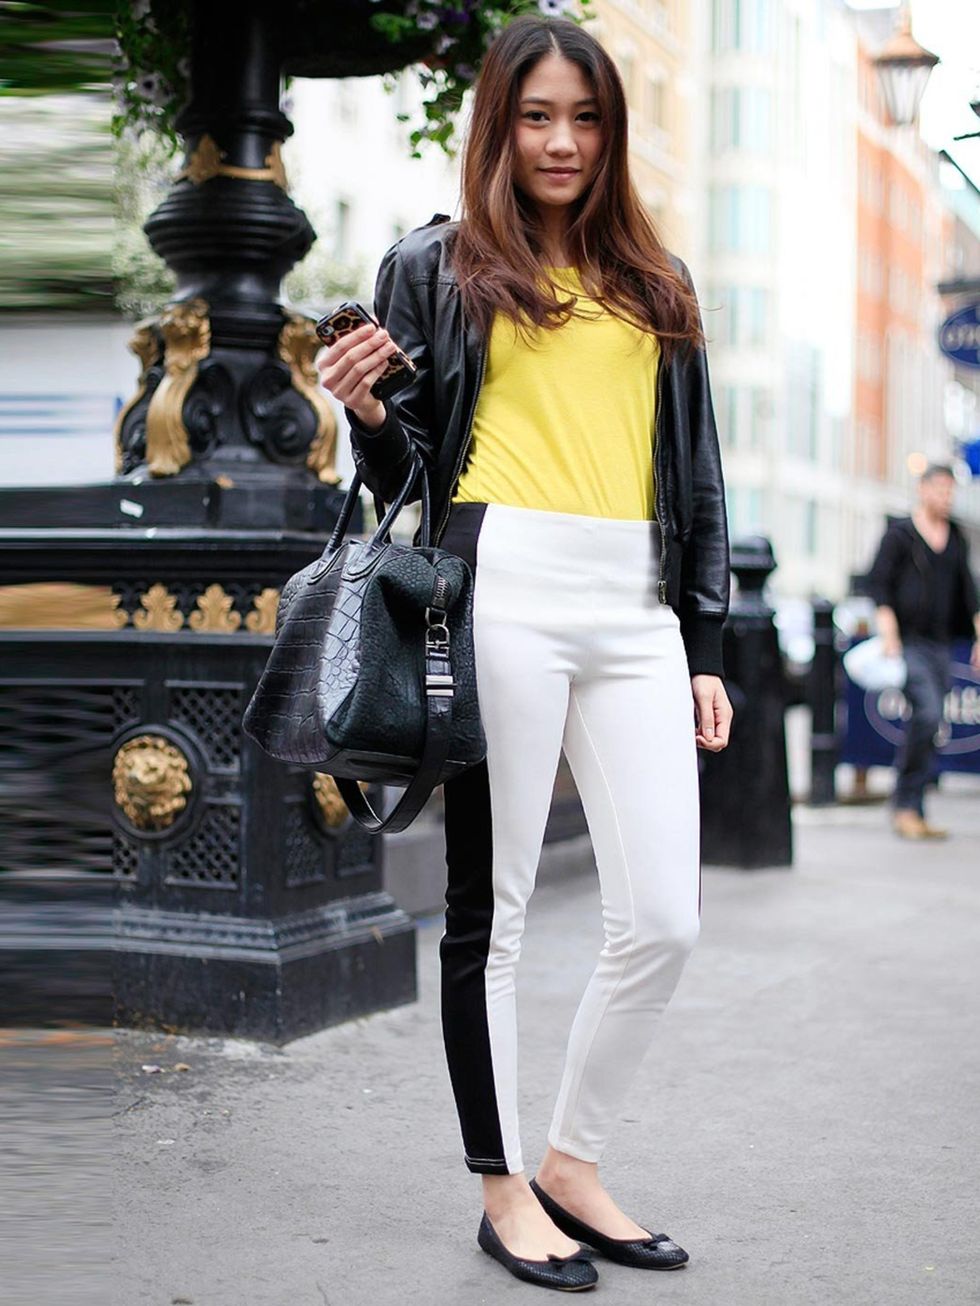 <p>Mimi, 21, Student. Forever 21 jacket, top and trousers from Thailand, Zara shoes, Givenchy bag.Photo by Silvia Olsen</p>